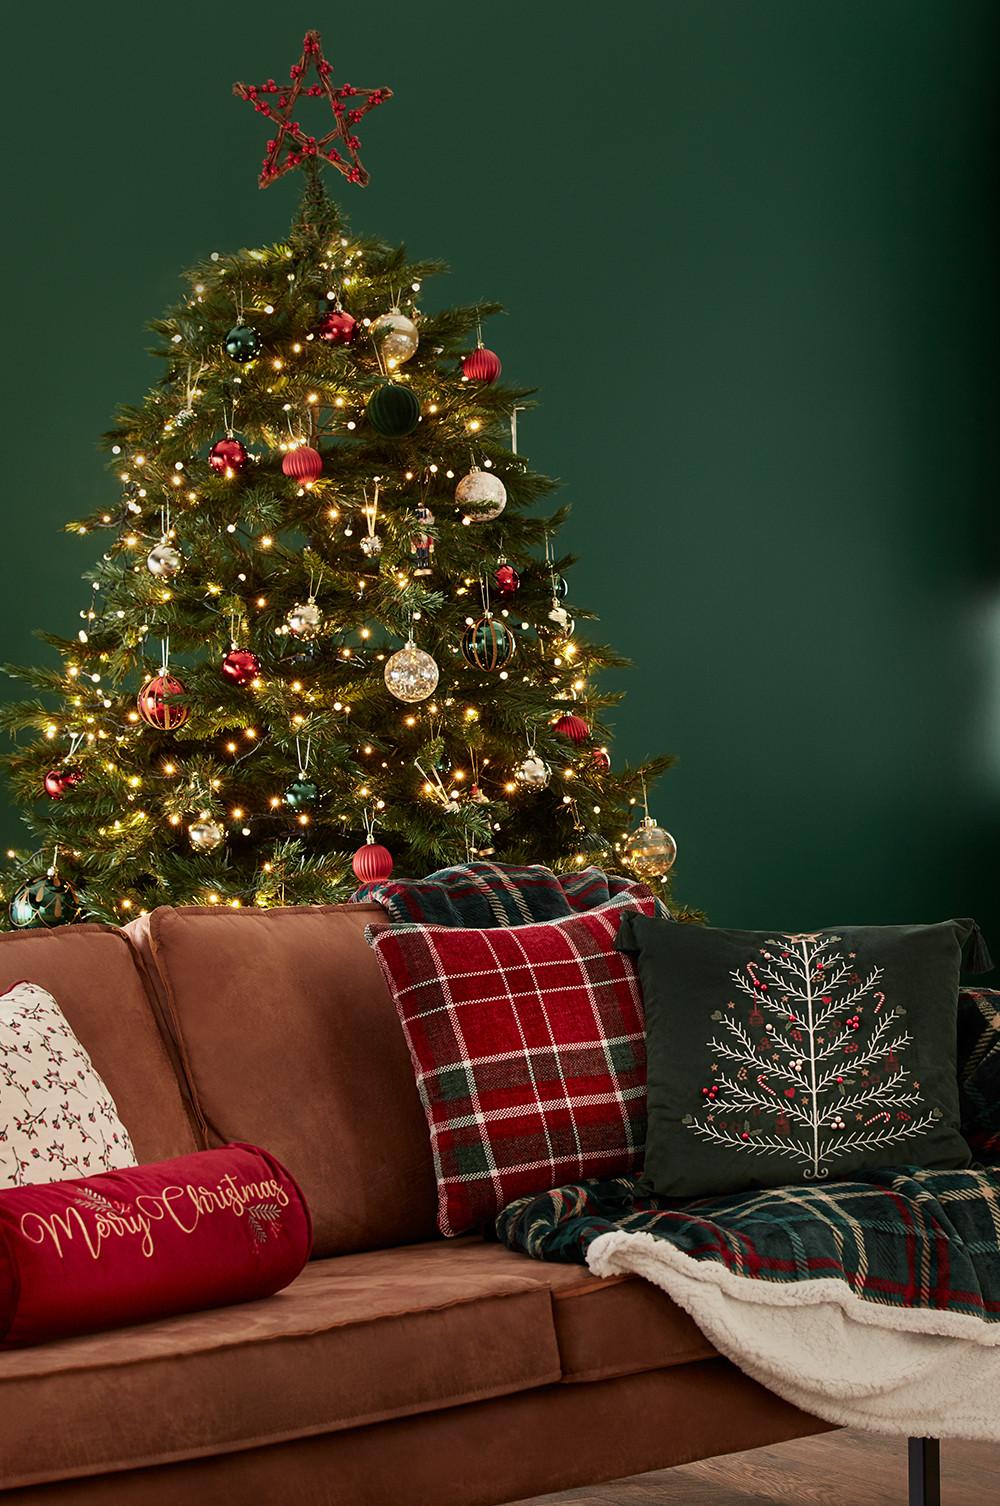 Christmas living room set up with festive pillows and tartan throws